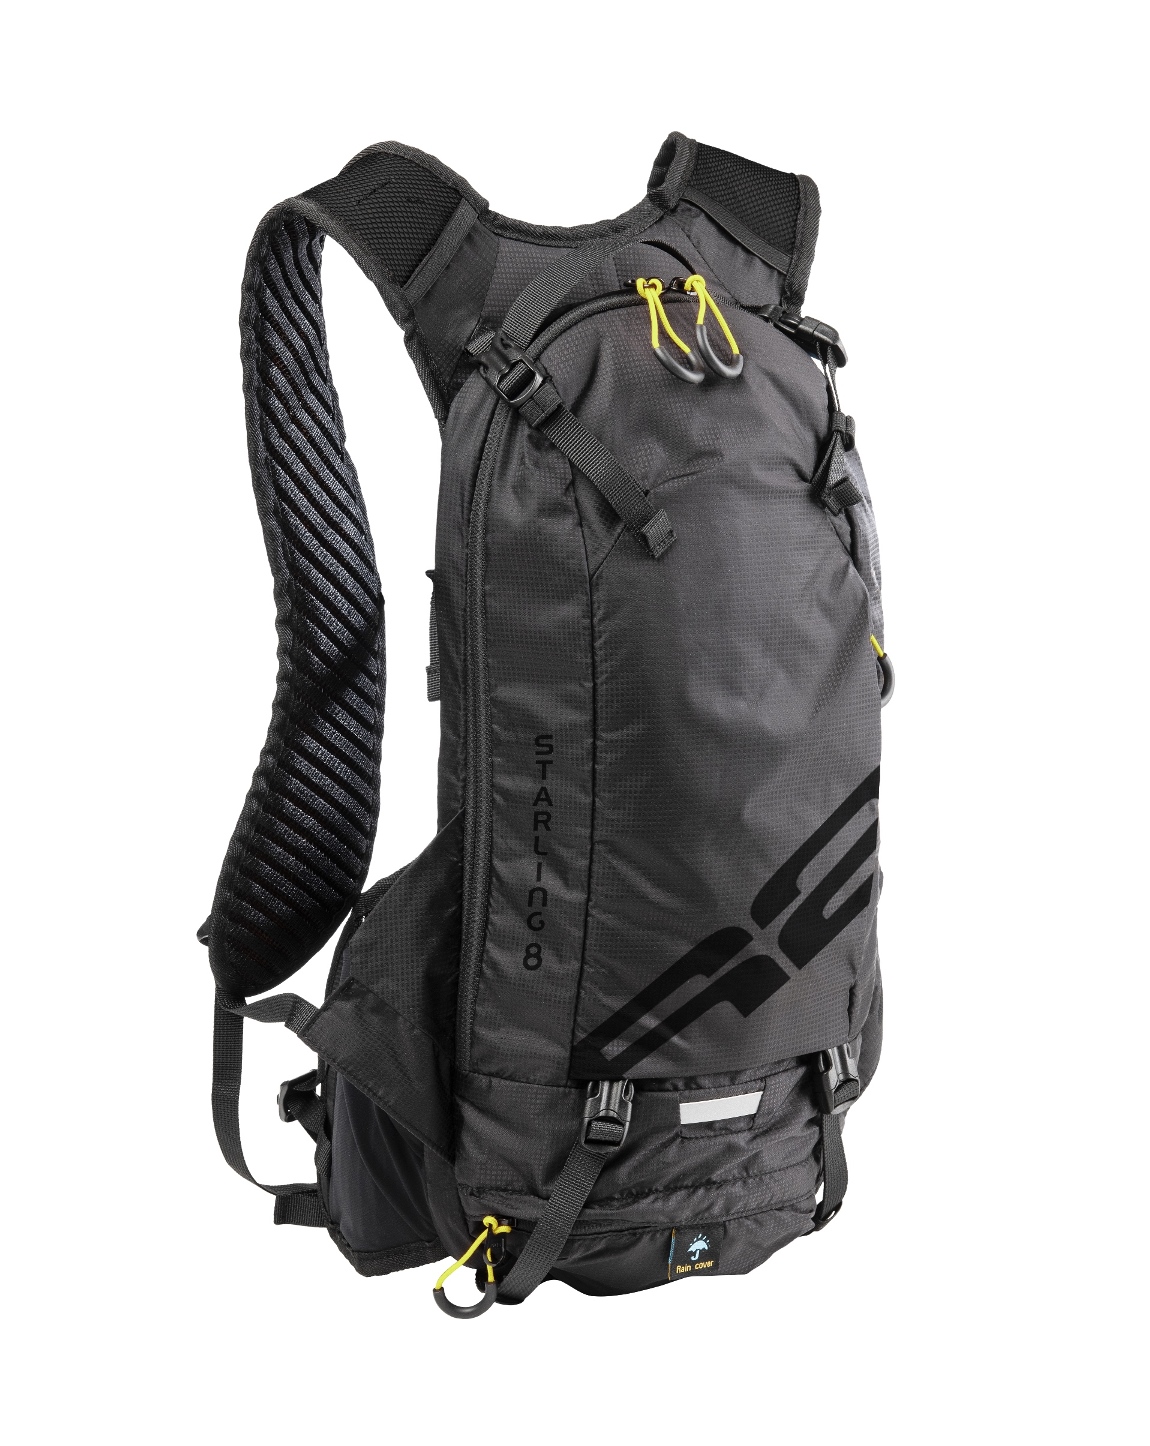 Sport backpack  R2 STARLING ATBP03A 8L